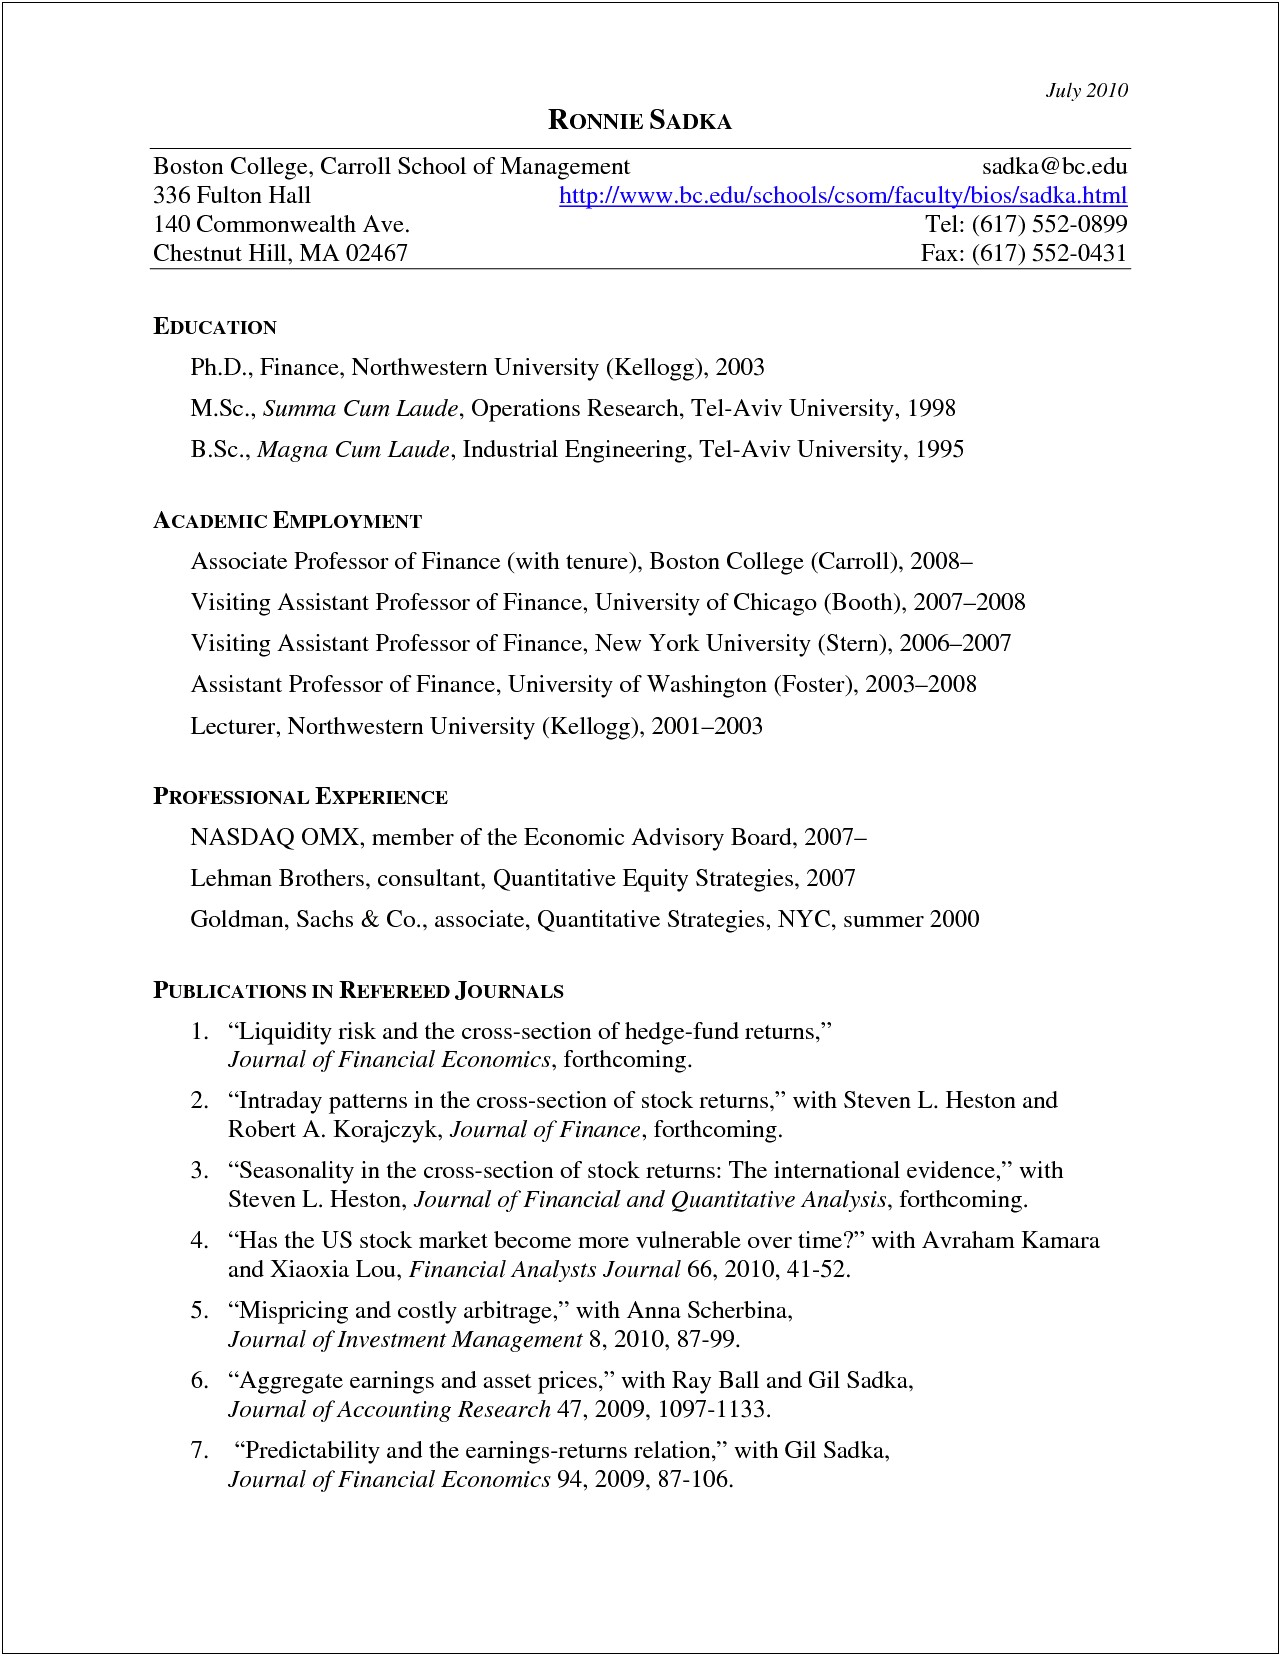 An Example Resume For Harvard Kennedy